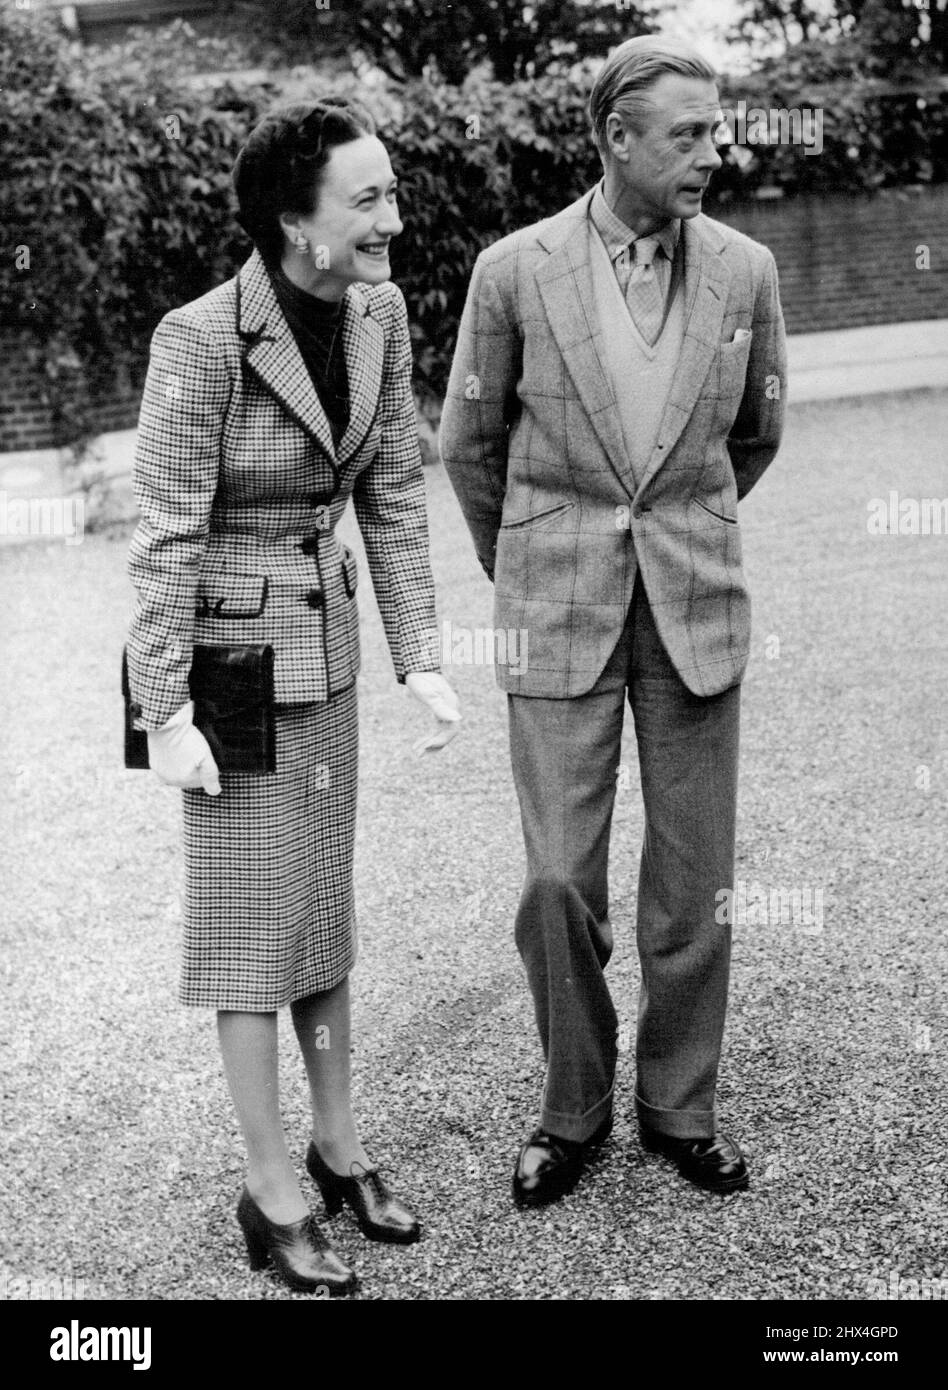 Quiet Week-end for the WindsorPhoto Shows: The Duke and Duchess of Windsor seen enjoying a joke in the grounds of Ednam Lodge, Sunningdale, this morning October 12.The Duke and Duchess of Windsor rested today October 12 after their near-midnight arrival at Ednam Lodge, Sunningdale, from France. They have planned a quiet week-end settling in at the house which has been lent them by the earl of Dudley. Next week they will come to London for some private visits. They will also spend some time at Windsor where much of the Duke's furniture and possessions have seen stored. October 12, 1946. (Photo Stock Photo